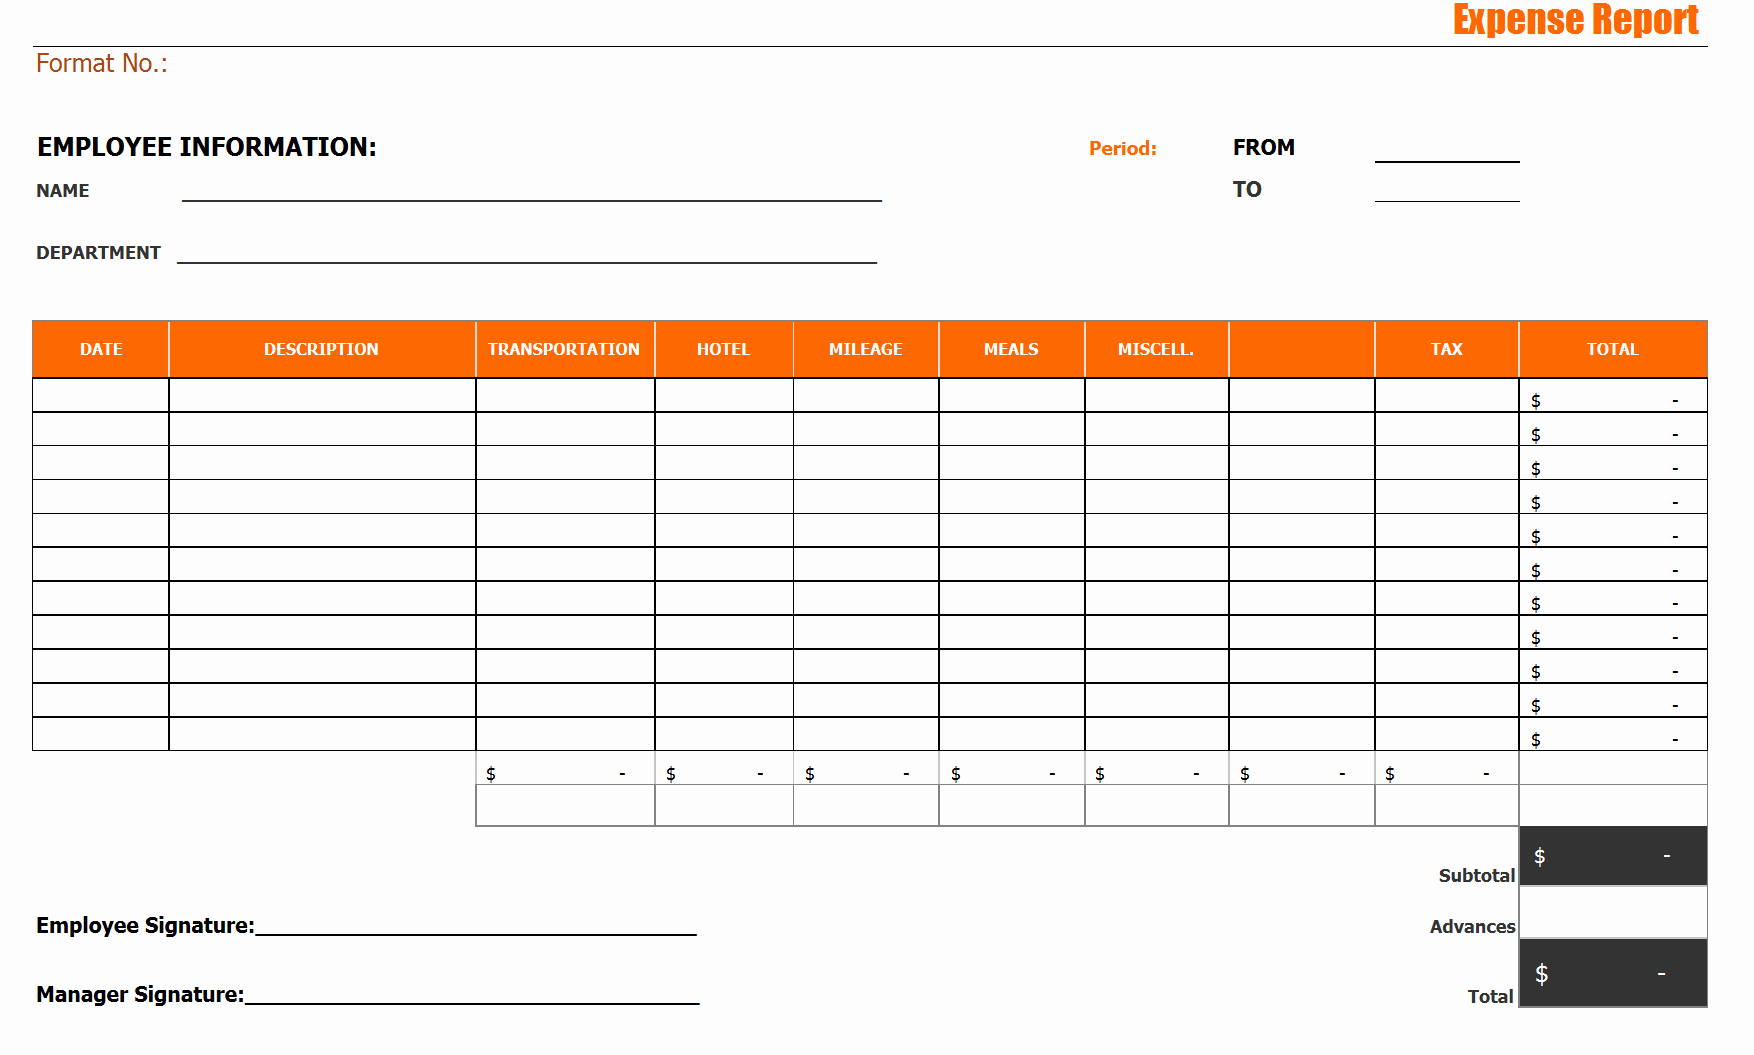 Basic Expense Report Template Luxury Exceptional Basic Expense Report form with orange Table